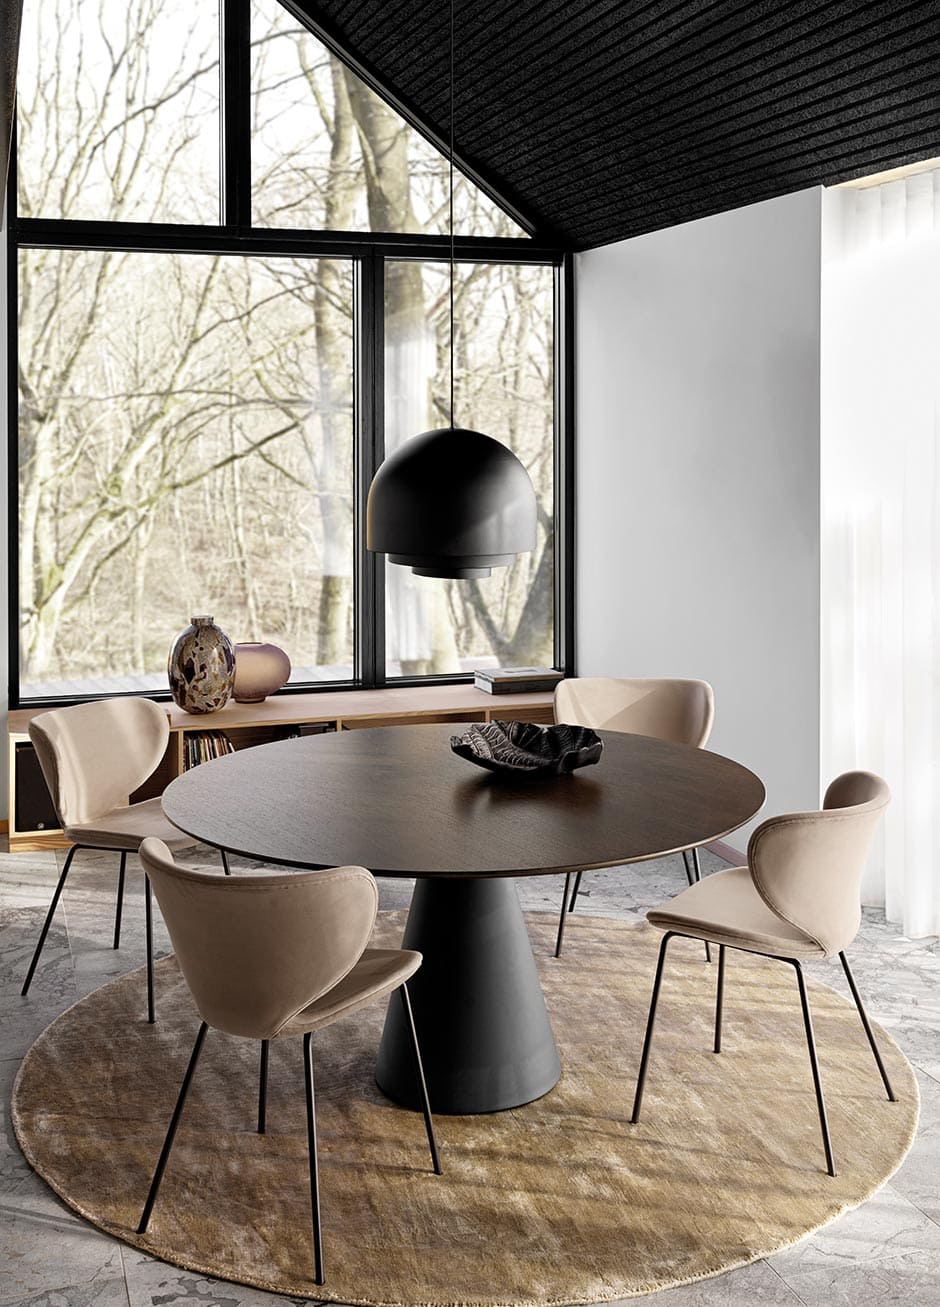 Discover BoConcept’s New Kollektion, plus styling tips for key spaces at your places